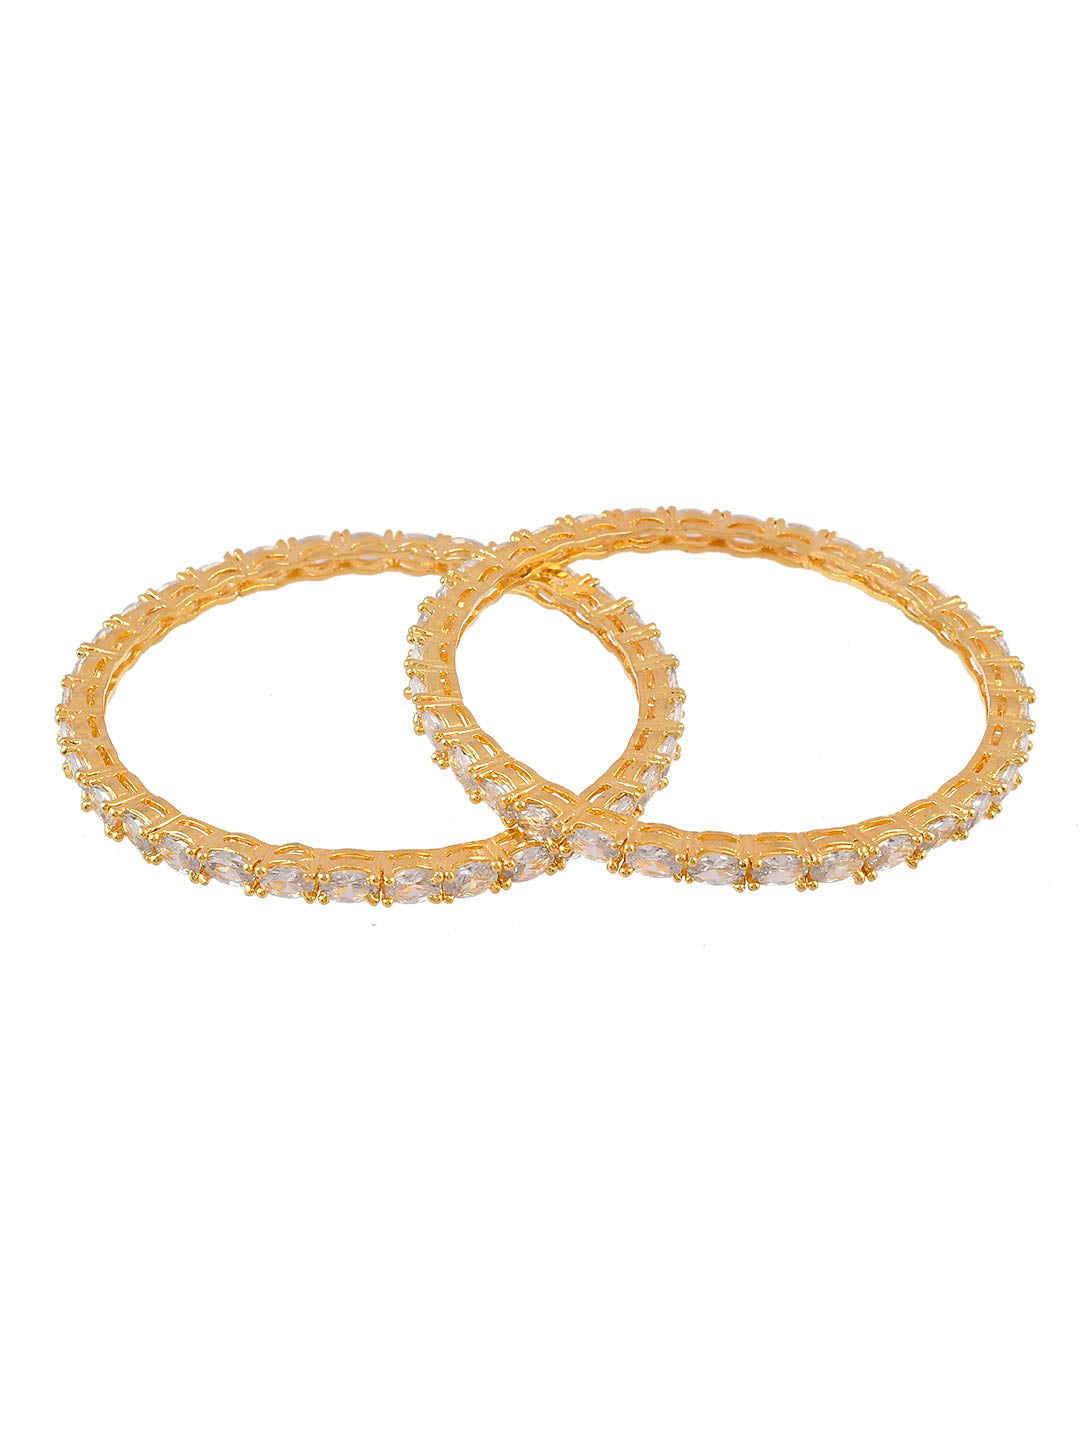 Gold Plated Handcrafted Ad Bangles